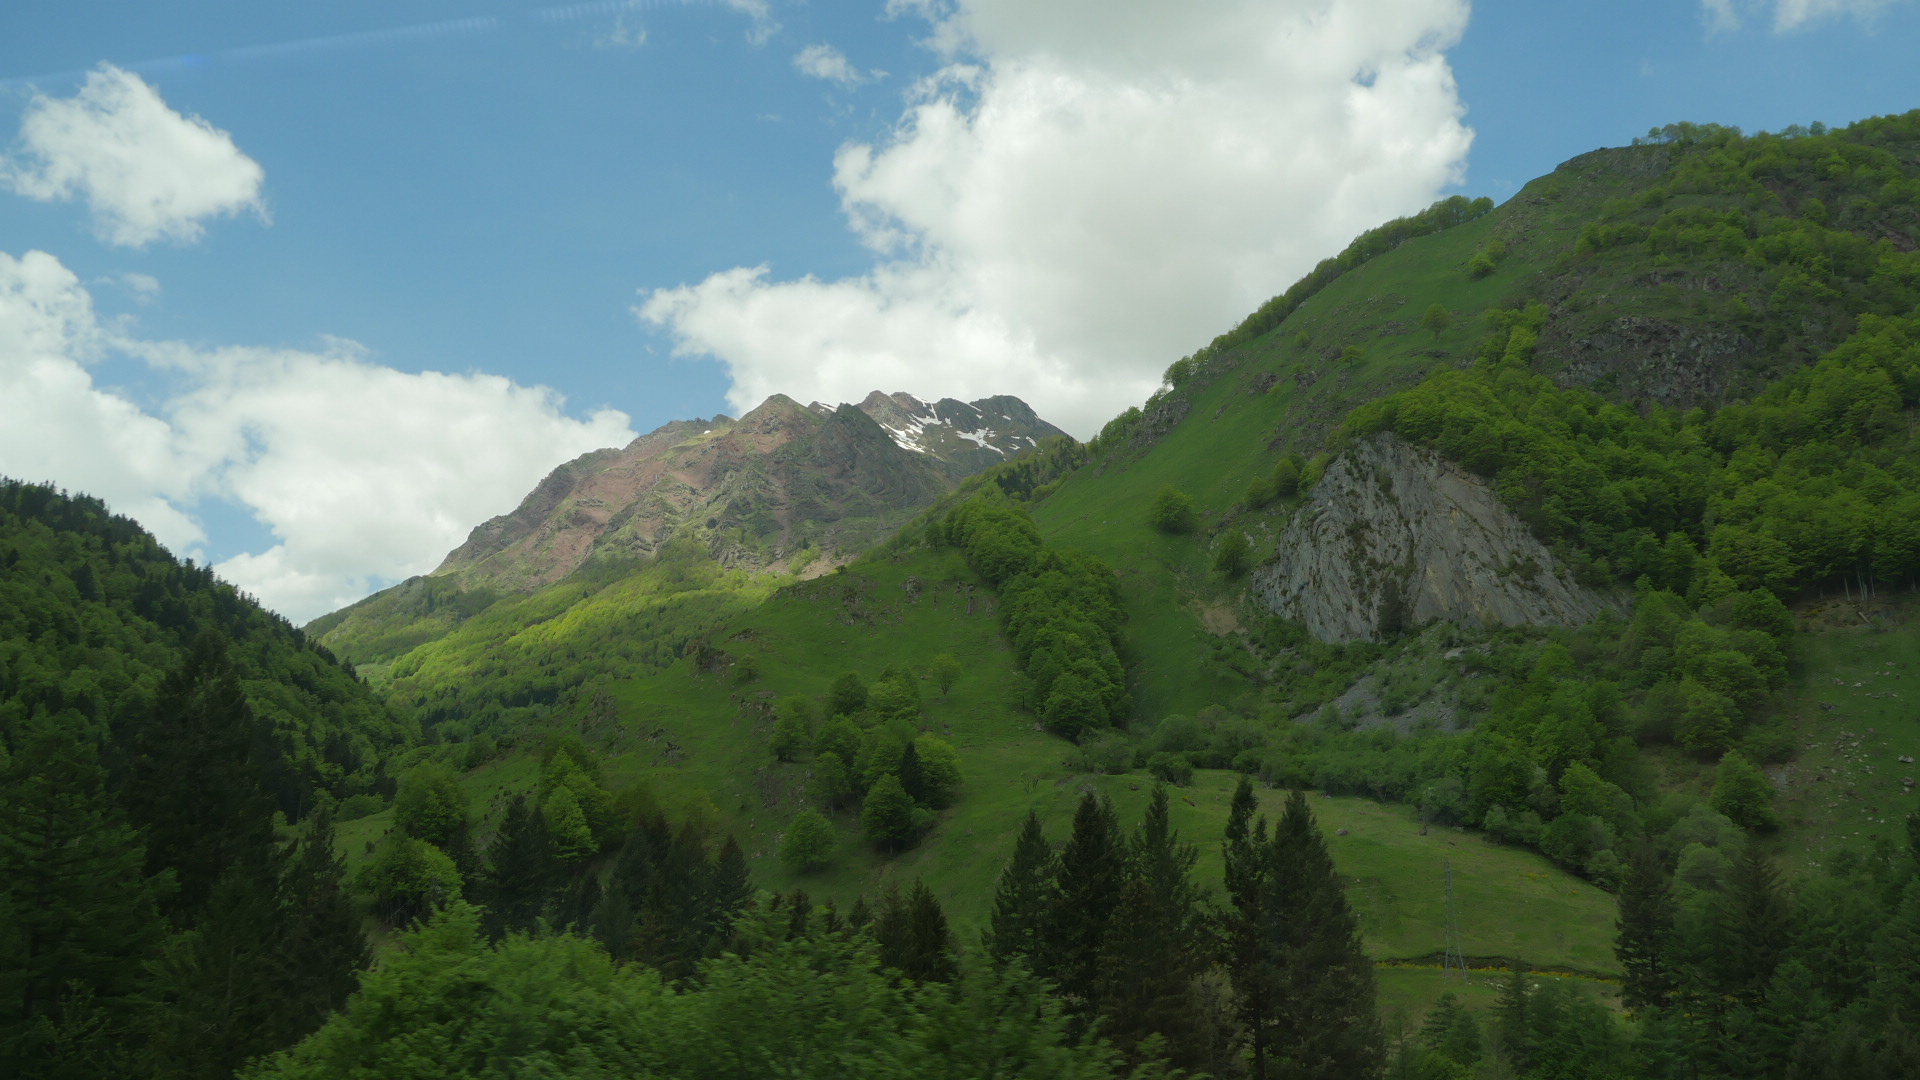 Pyrenees Mountains, Franz Werfel had to travel over to get to neutral Spain from Nazi captured France.